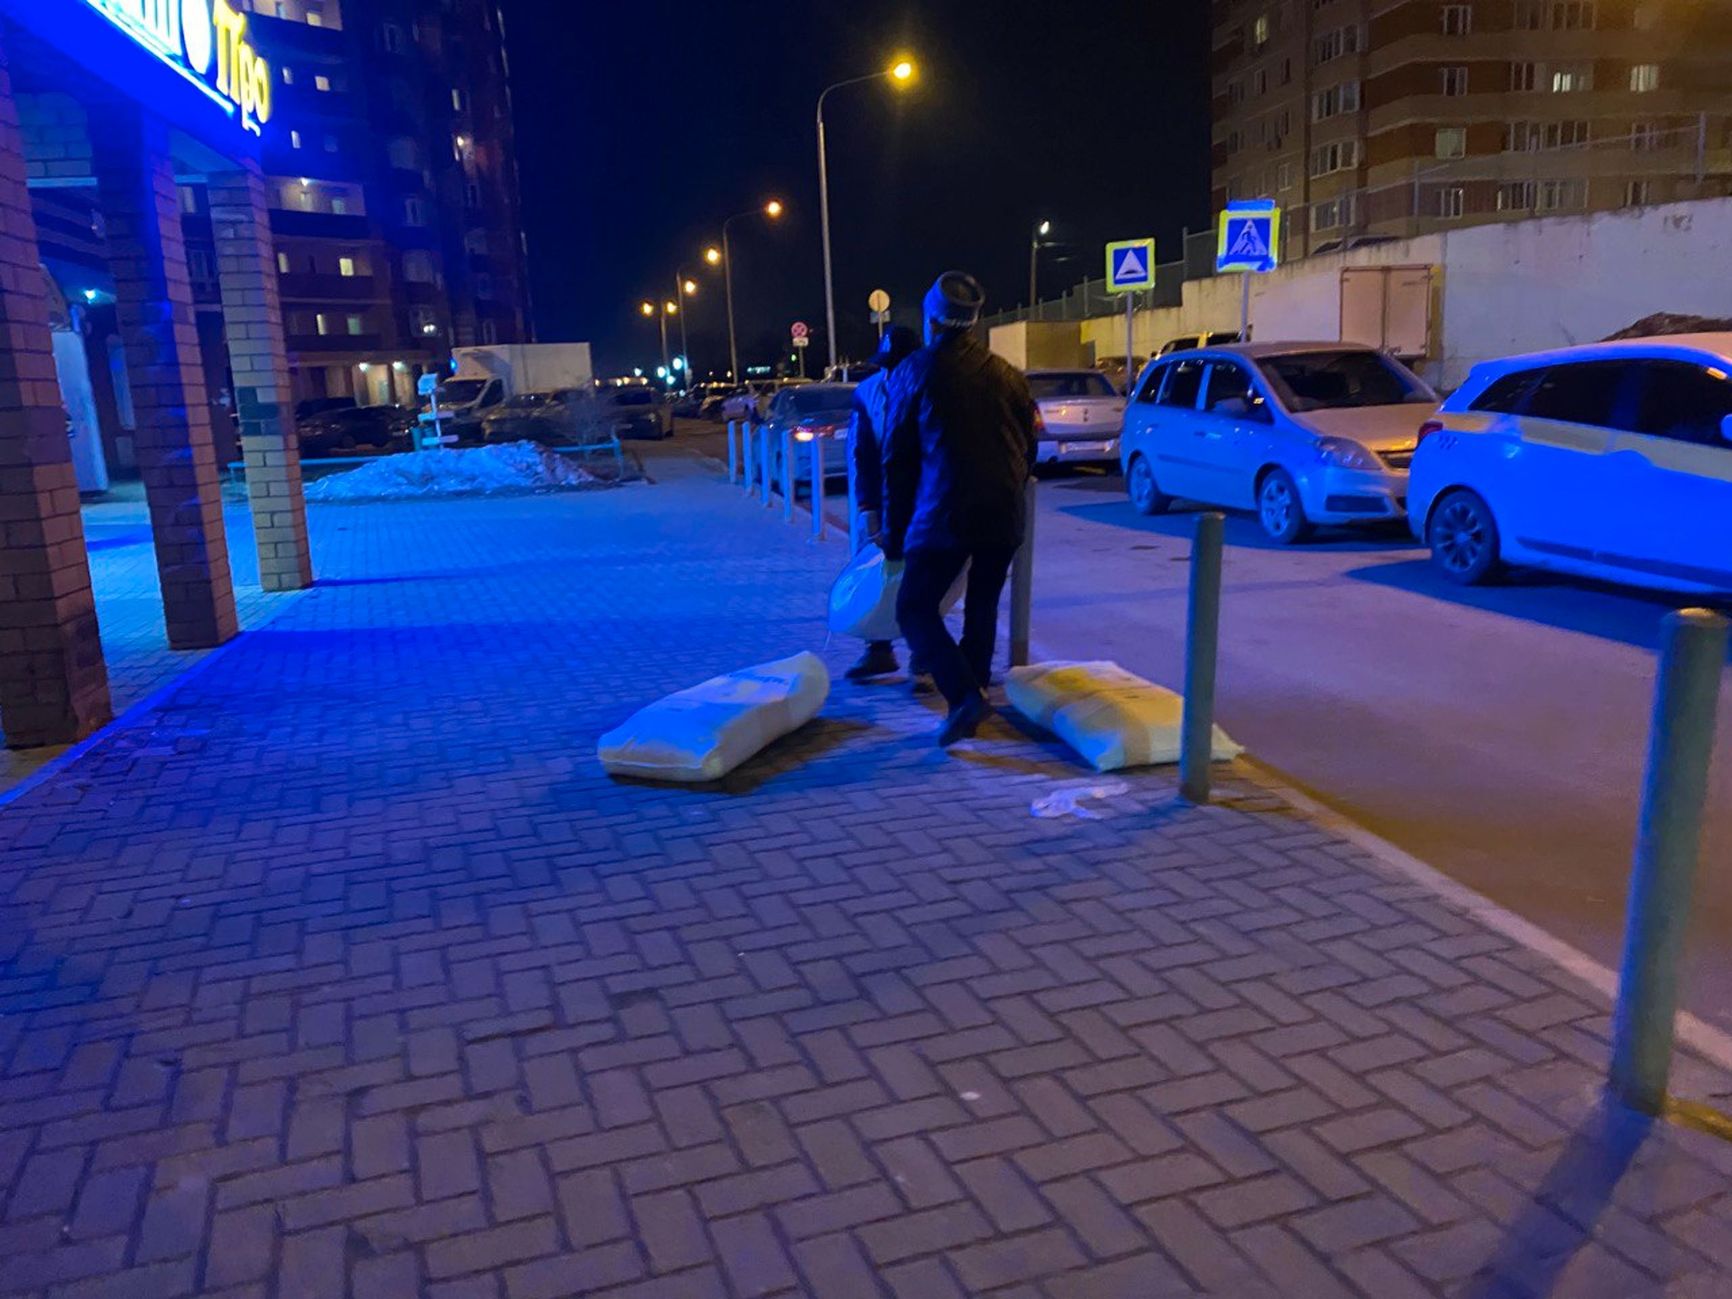 In the Yuzhny microdistrict, some Tajik migrants only go to work unloading trucks late in the evening in order “to avoid being too conspicuous”